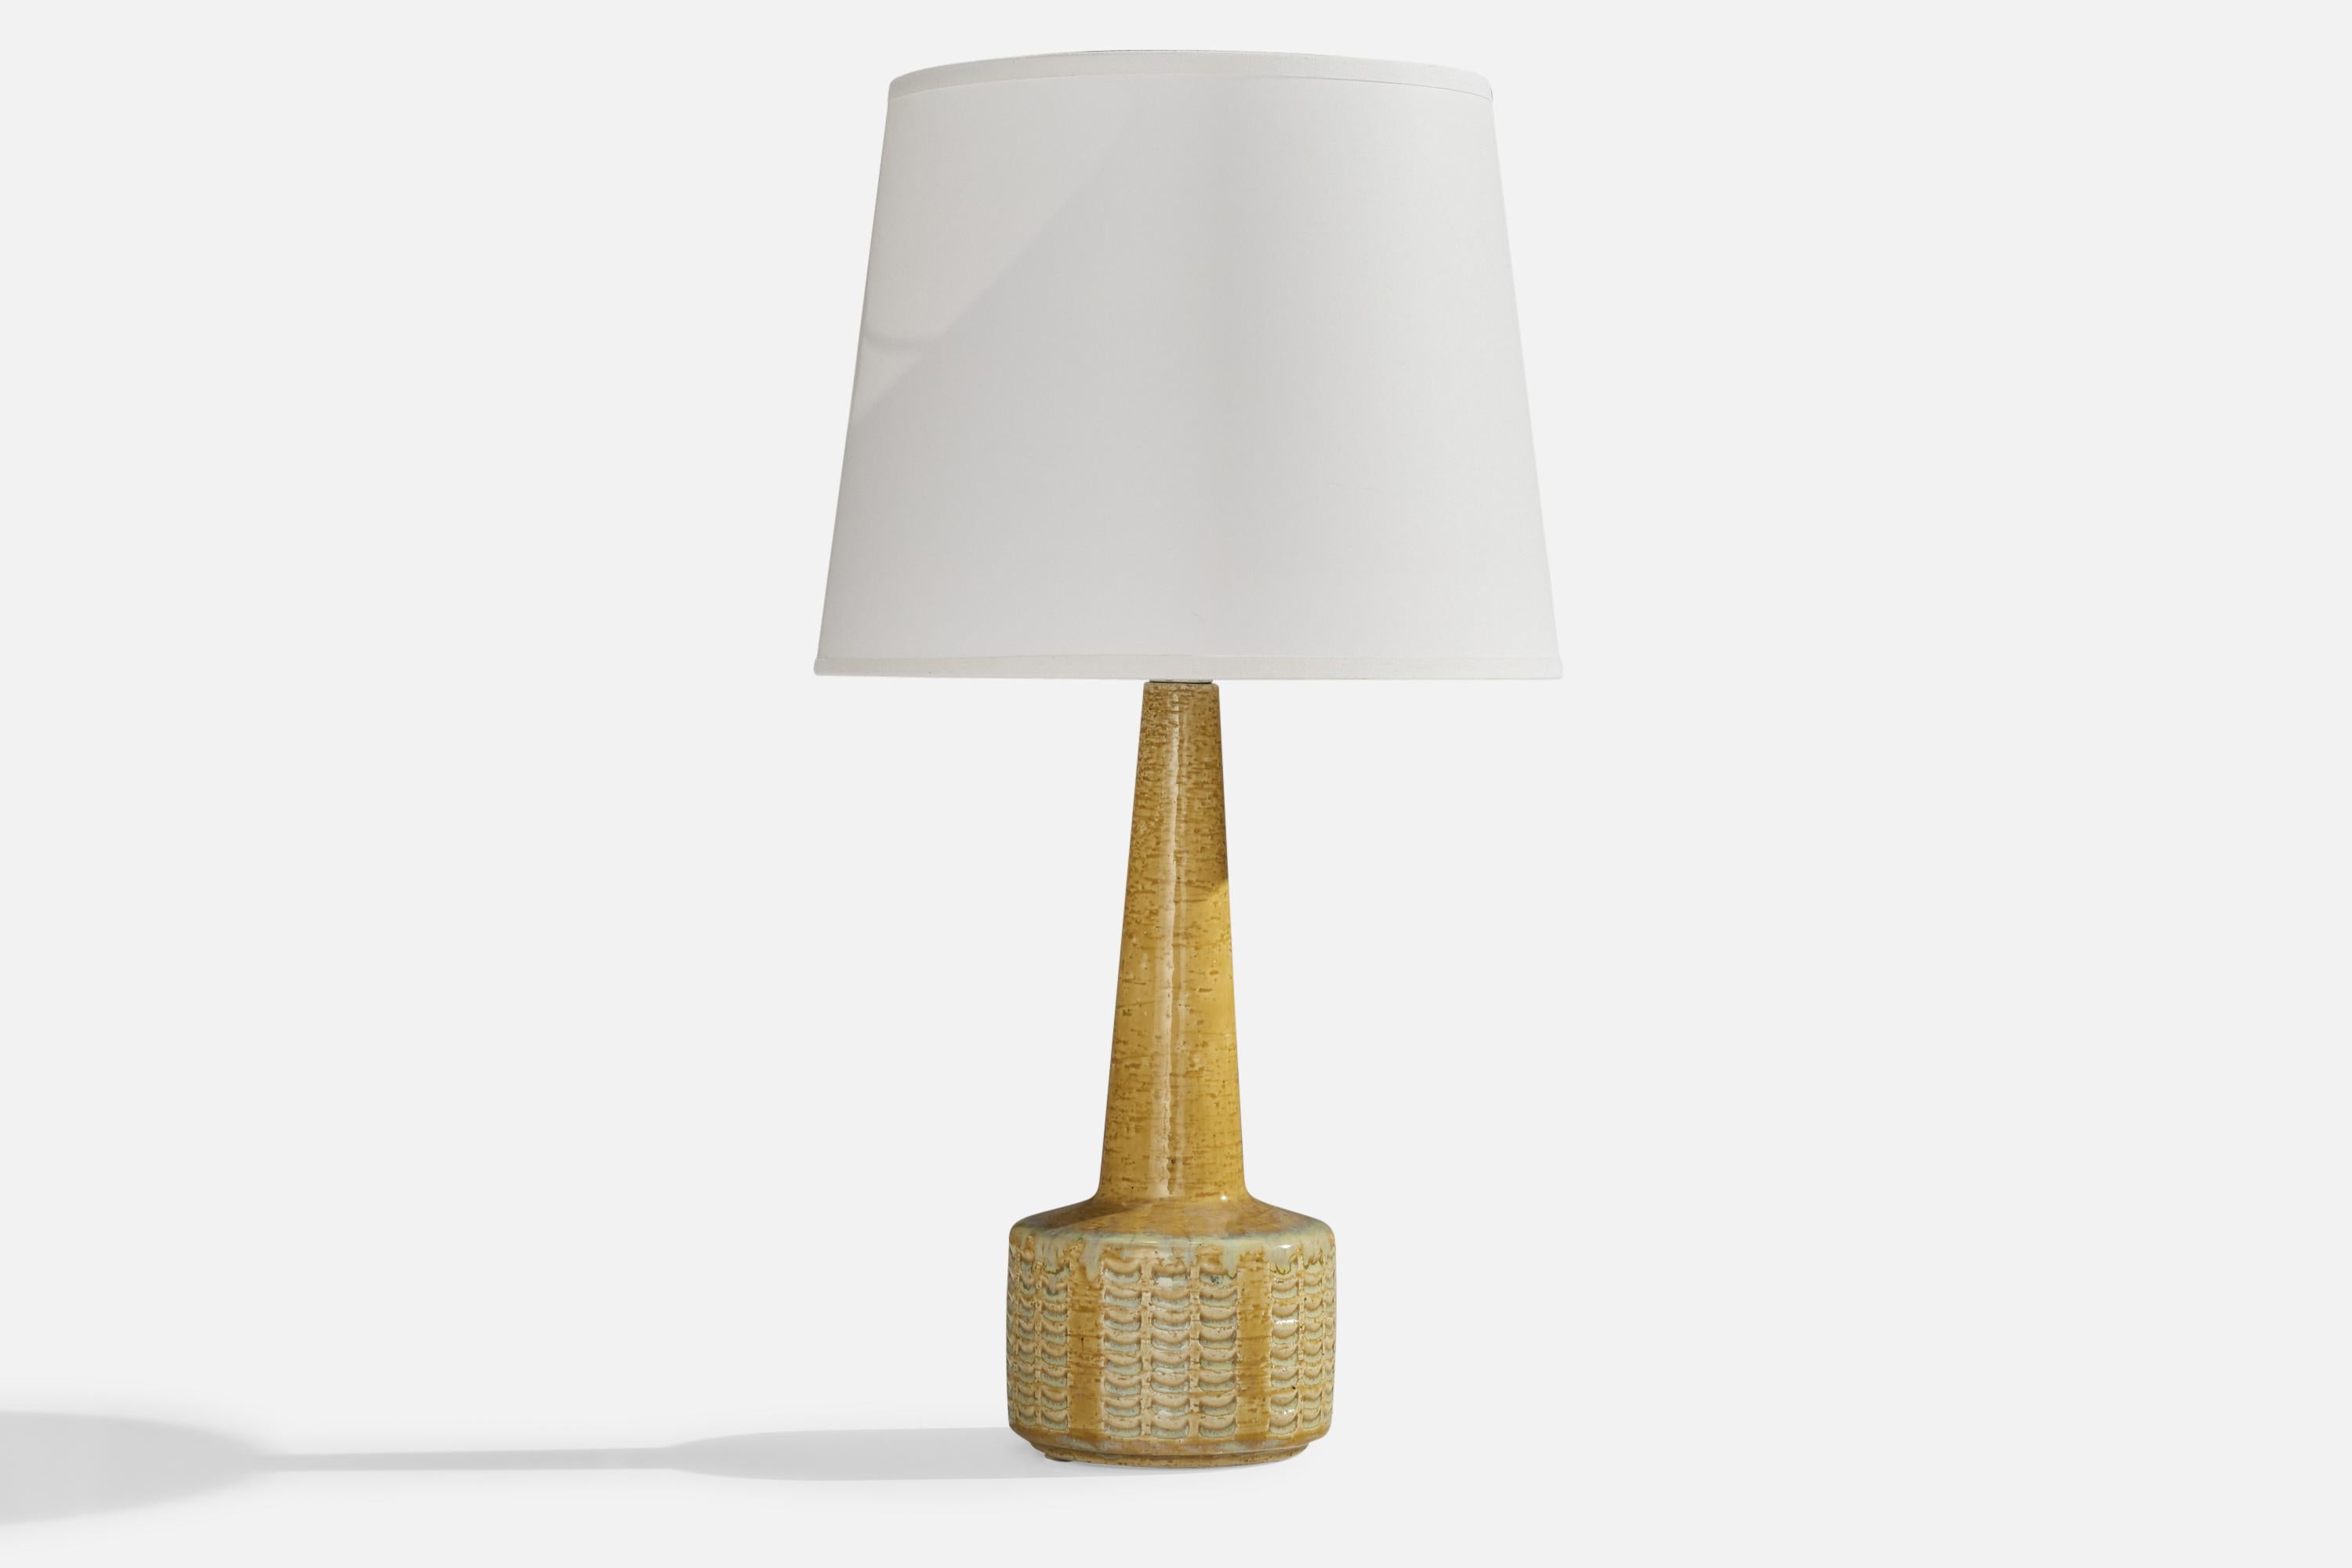 A yellow-glazed stoneware table lamp designed by Per & Annelise Linneman-Schmidt and produced by Palshus, Denmark, 1960s.

Dimensions of Lamp (inches): 13”  H x 4.4”  Diameter
Dimensions of Shade (inches): 7”  Top Diameter x 10” Bottom Diameter x 8”